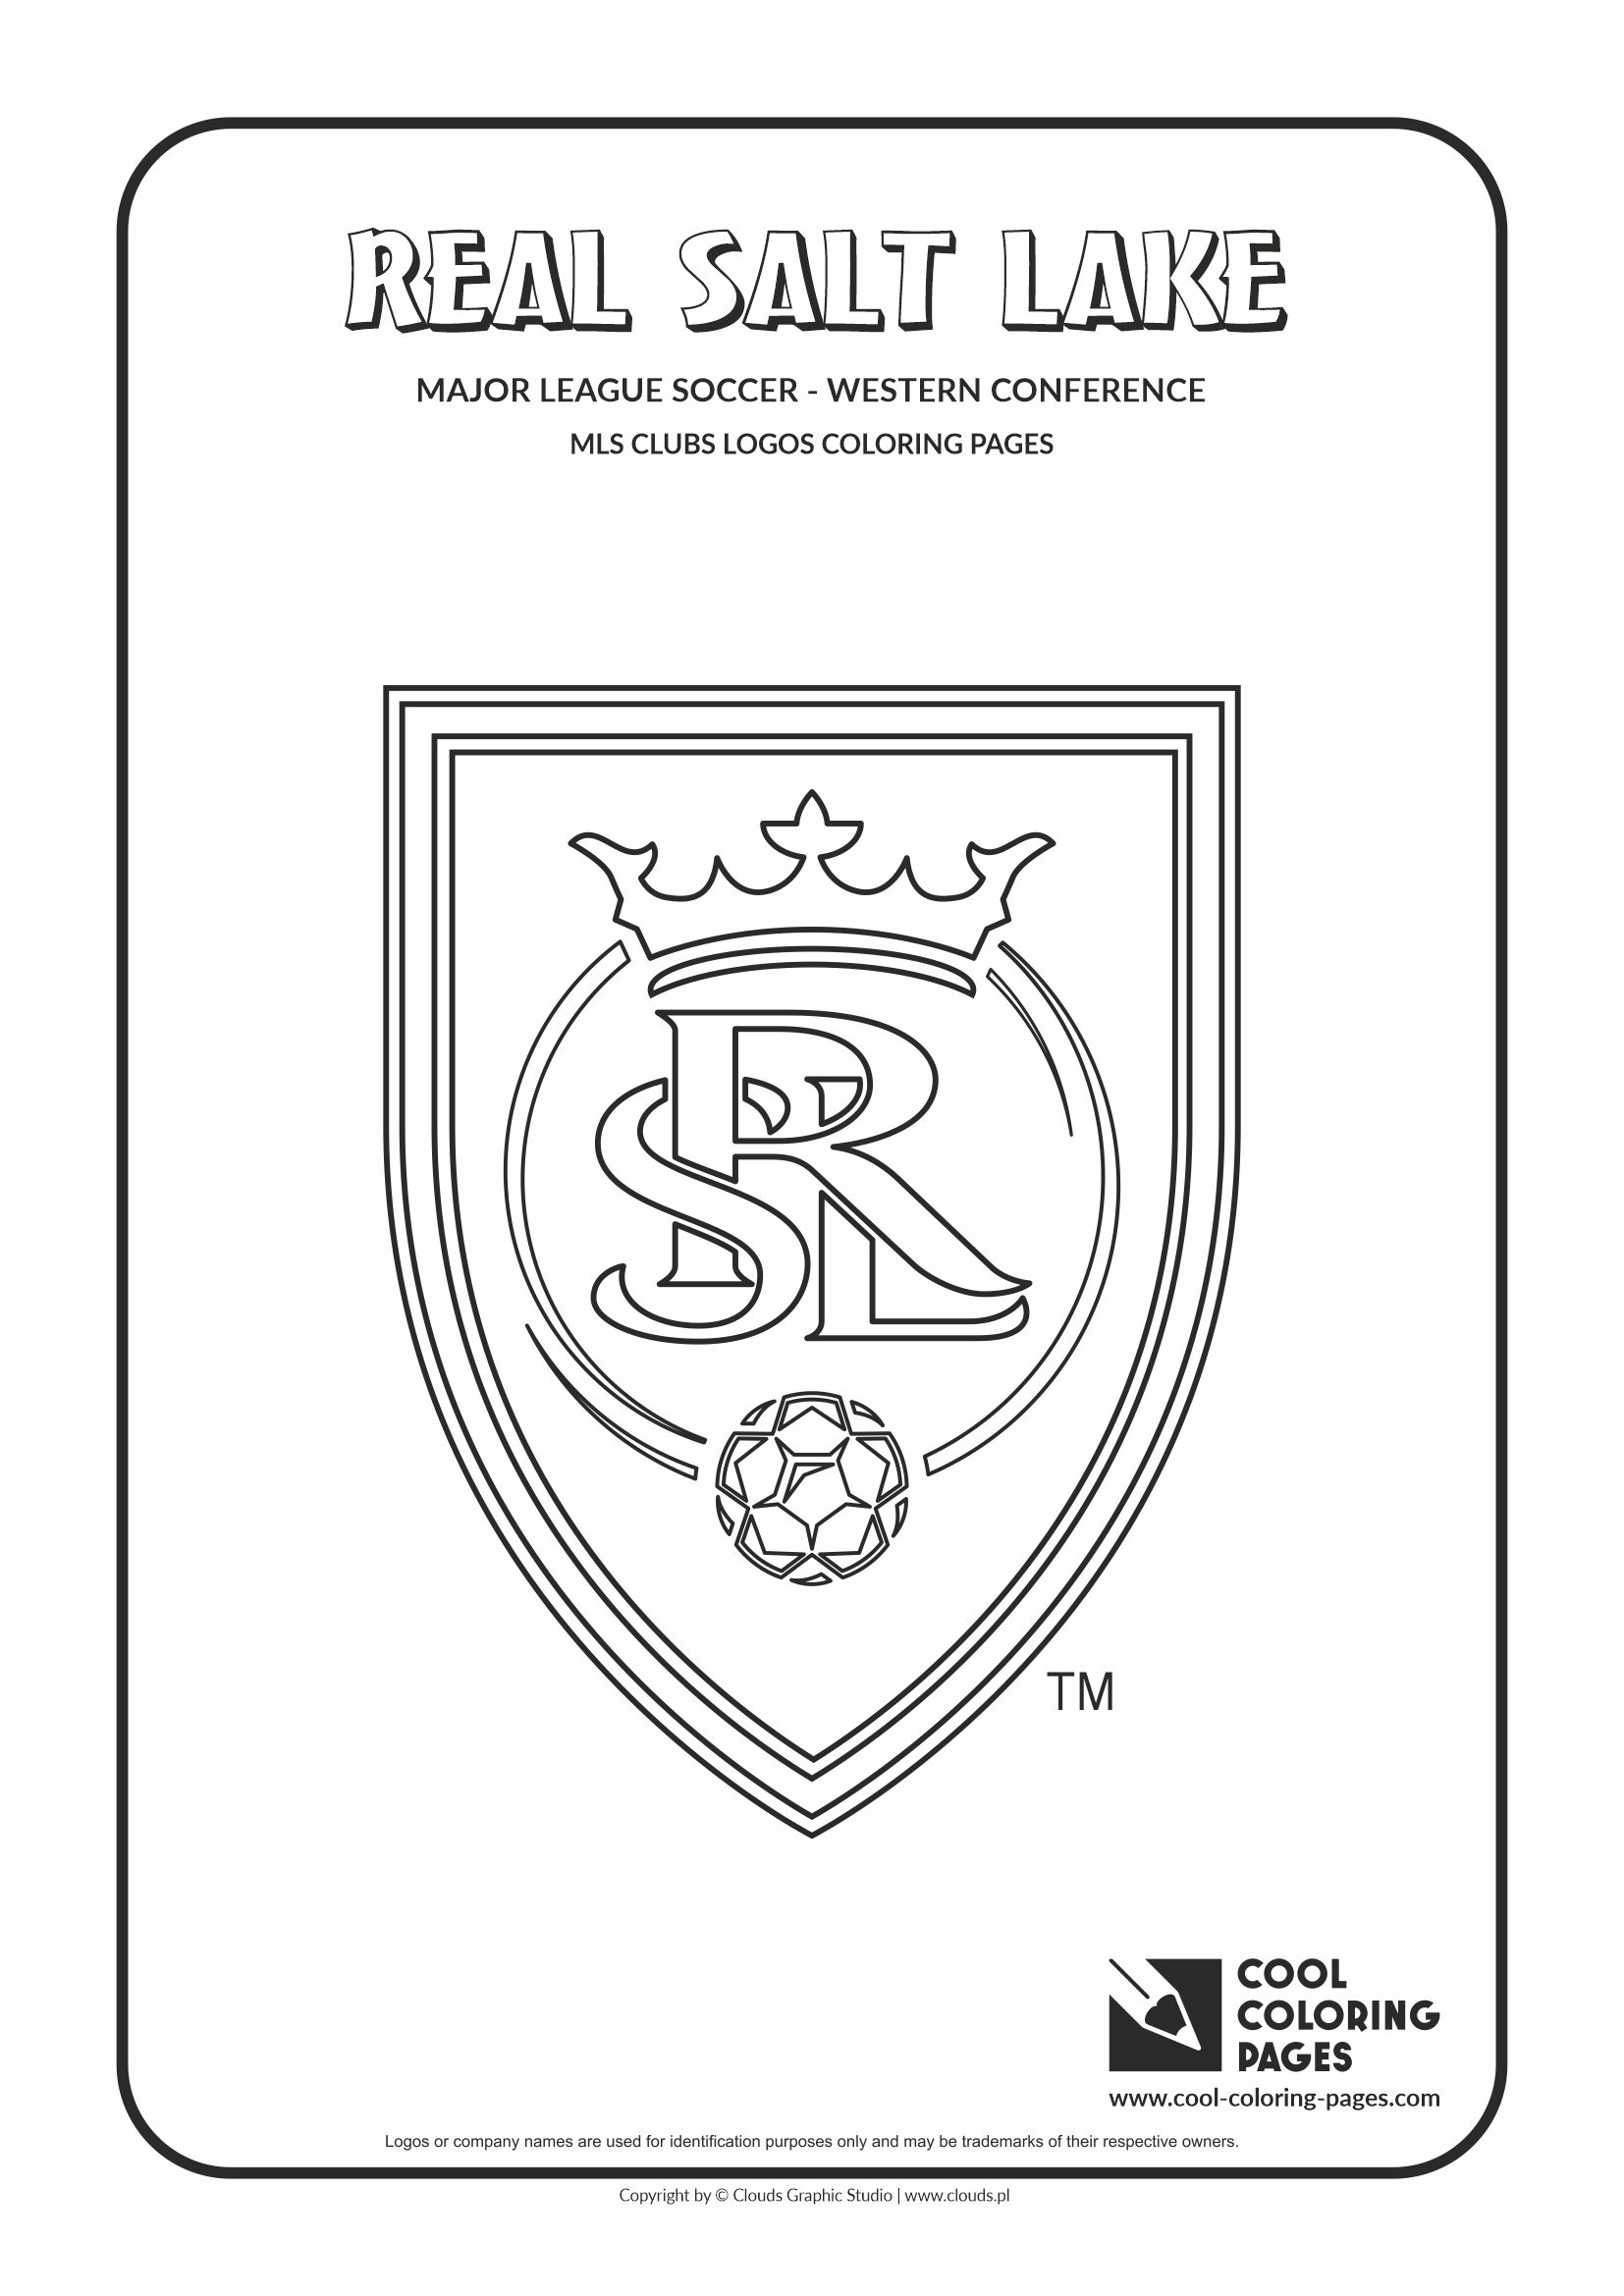 Cool Coloring Pages – MLS Clubs logos - Real Salt Lake